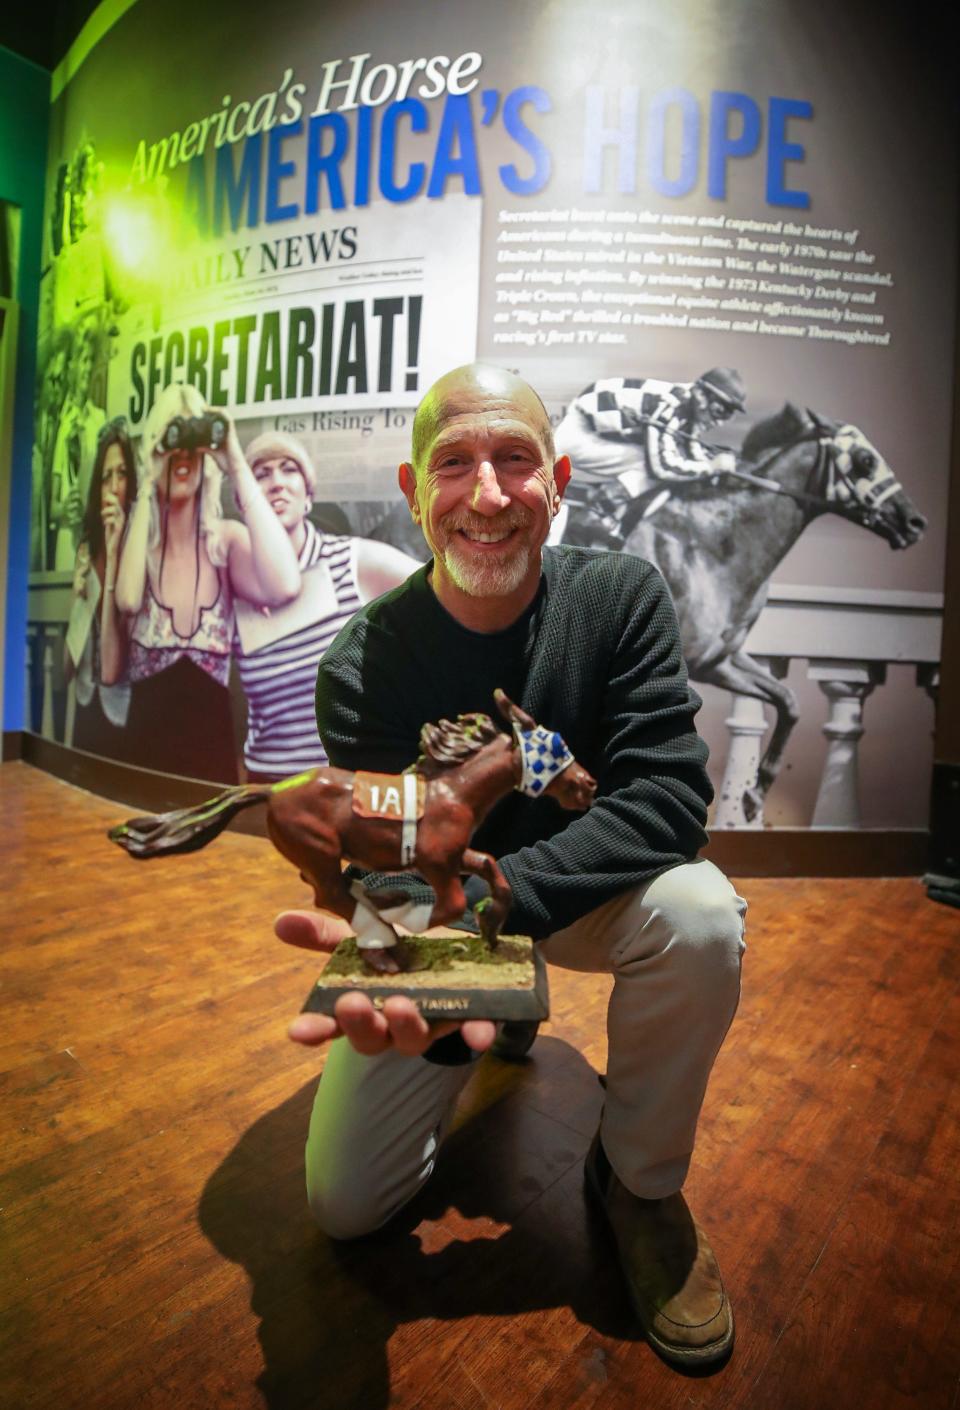 Leonard Lusky poses in the Secretariat exhibit at the Kentucky Derby Museum on Thursday, April 6, 2023.  He helped to develop and bring to market the Secretariat bobblehead the he is posing with.